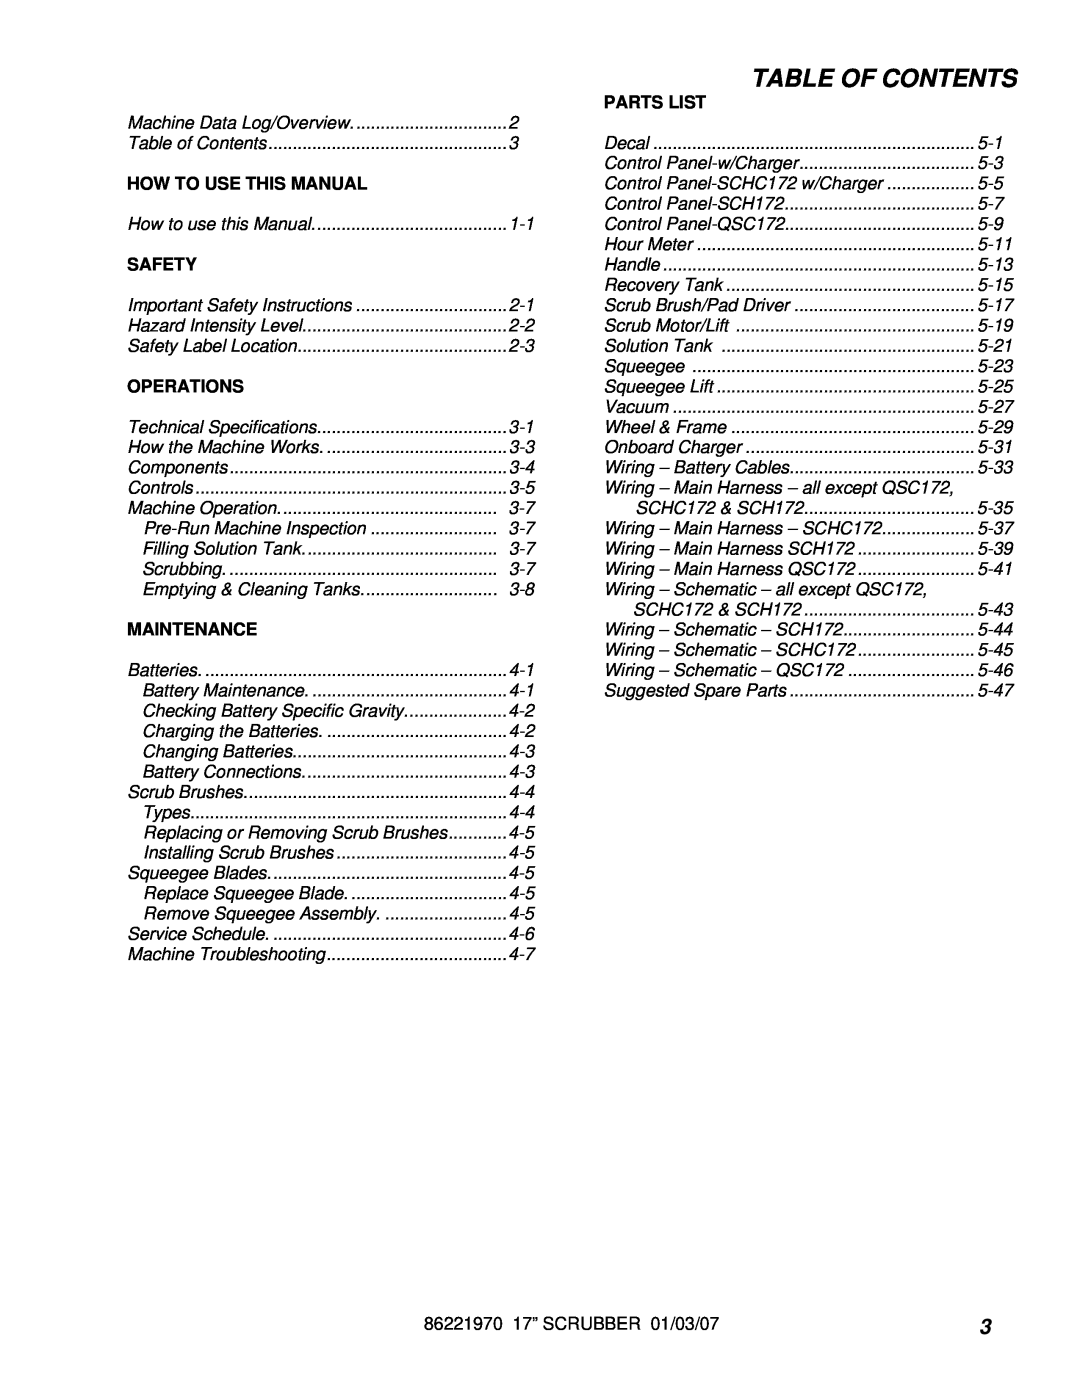 Windsor SCH172, HCC172, SCHC172 manual Table Of Contents, Parts List, How To Use This Manual, Safety, Operations, Maintenance 